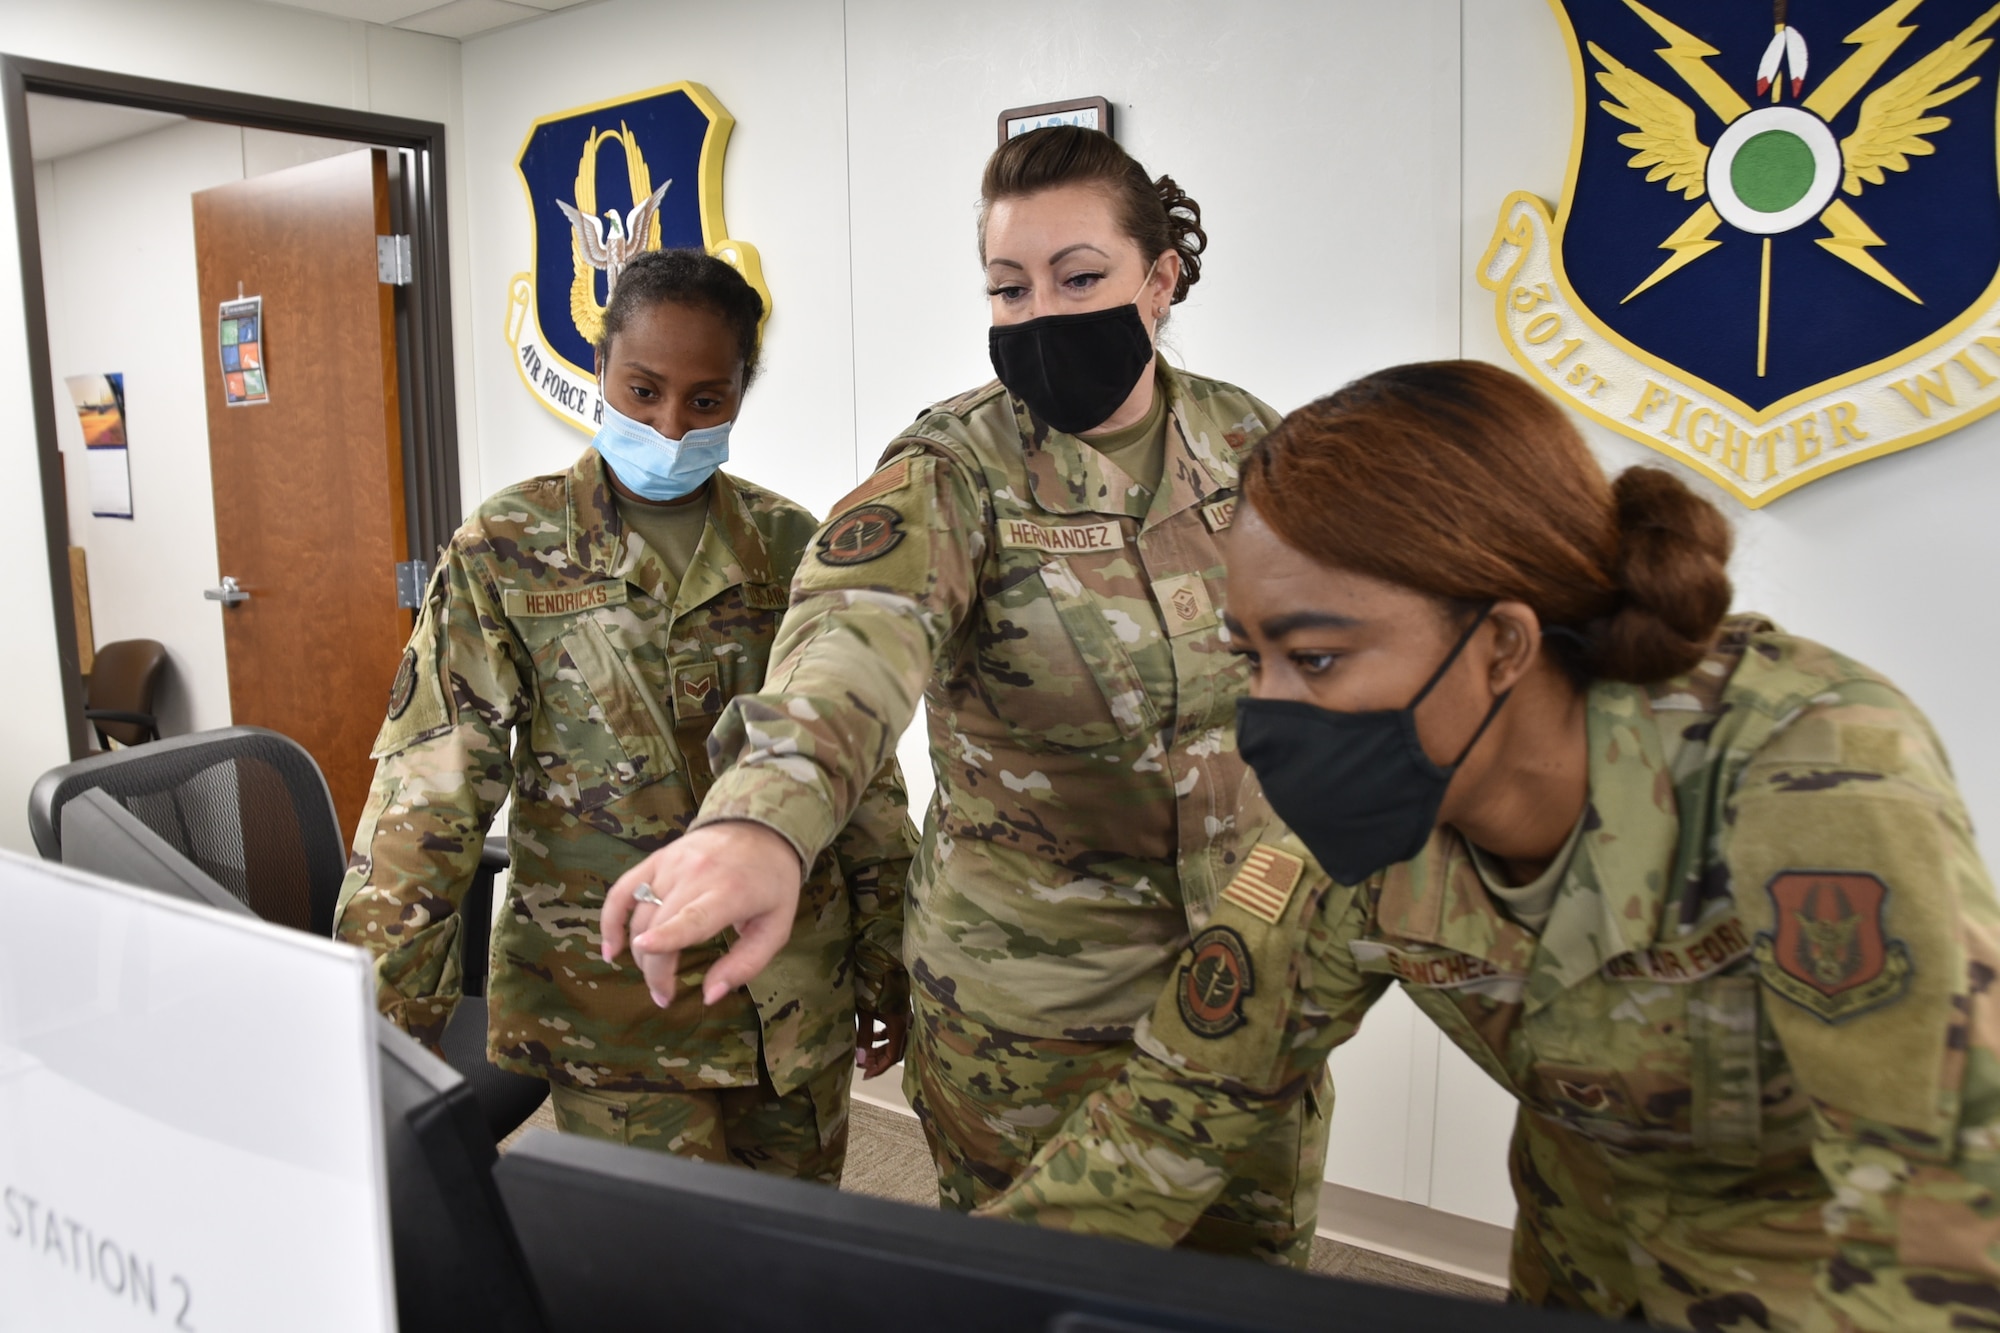 (center) 301st Fighter Wing Force Support Squadron and Wing Staff Agency first sergeant, Master Sgt. Cassandra Hernandez interacts with FSS personalists, Senior Airman Hendricks and Staff Sgt. Sanchez as they show her a new system at U.S. Naval Air Station Joint Reserve Base Fort Worth, Texas on June 5th, 2021. The first sergeant's primary role is to support the mission through interaction, support and management of all unit-assigned personnel and their families. (U.S. Air Force photo by Senior Airman William Downs)